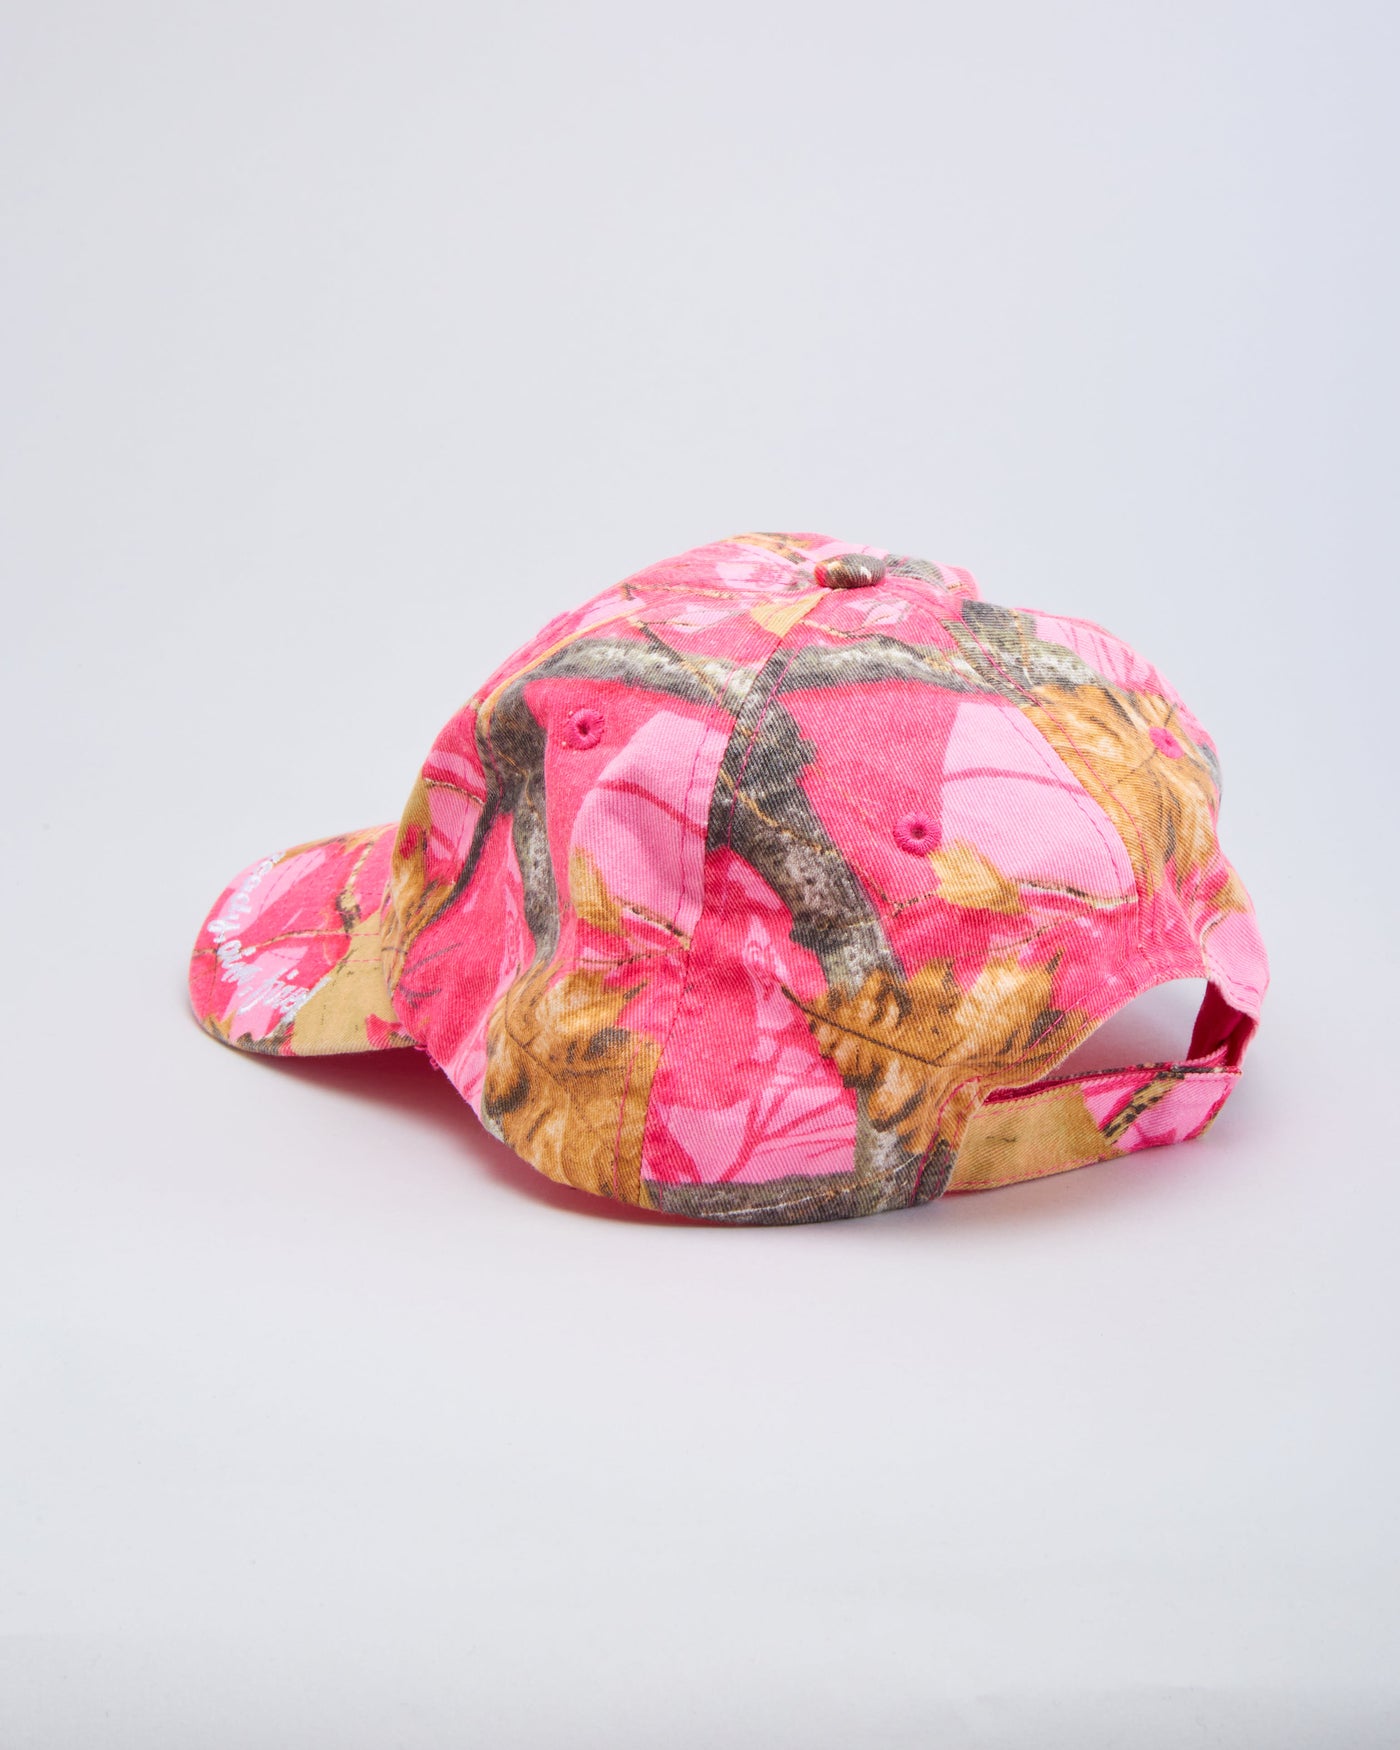 Pretty In Pink Deadly In Camo Slogan Pink Camouflage Baseball Cap / Hat